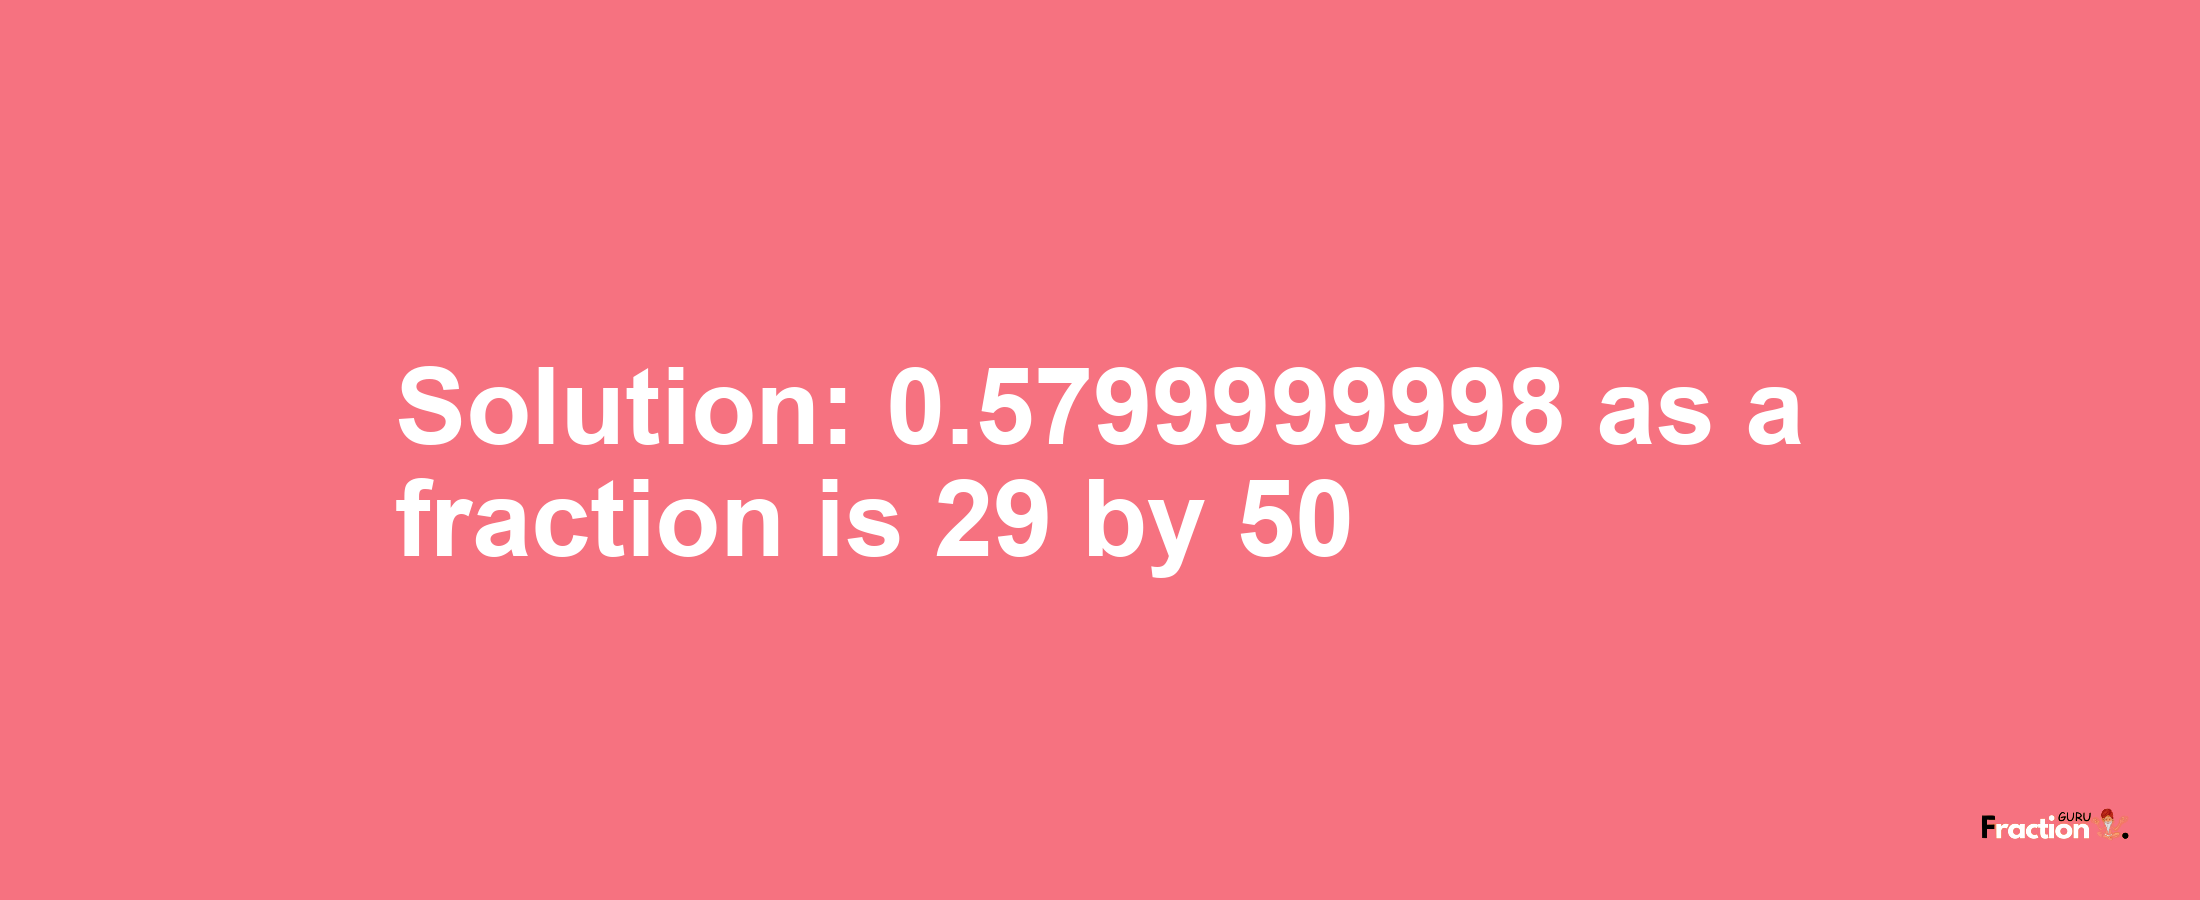 Solution:0.5799999998 as a fraction is 29/50